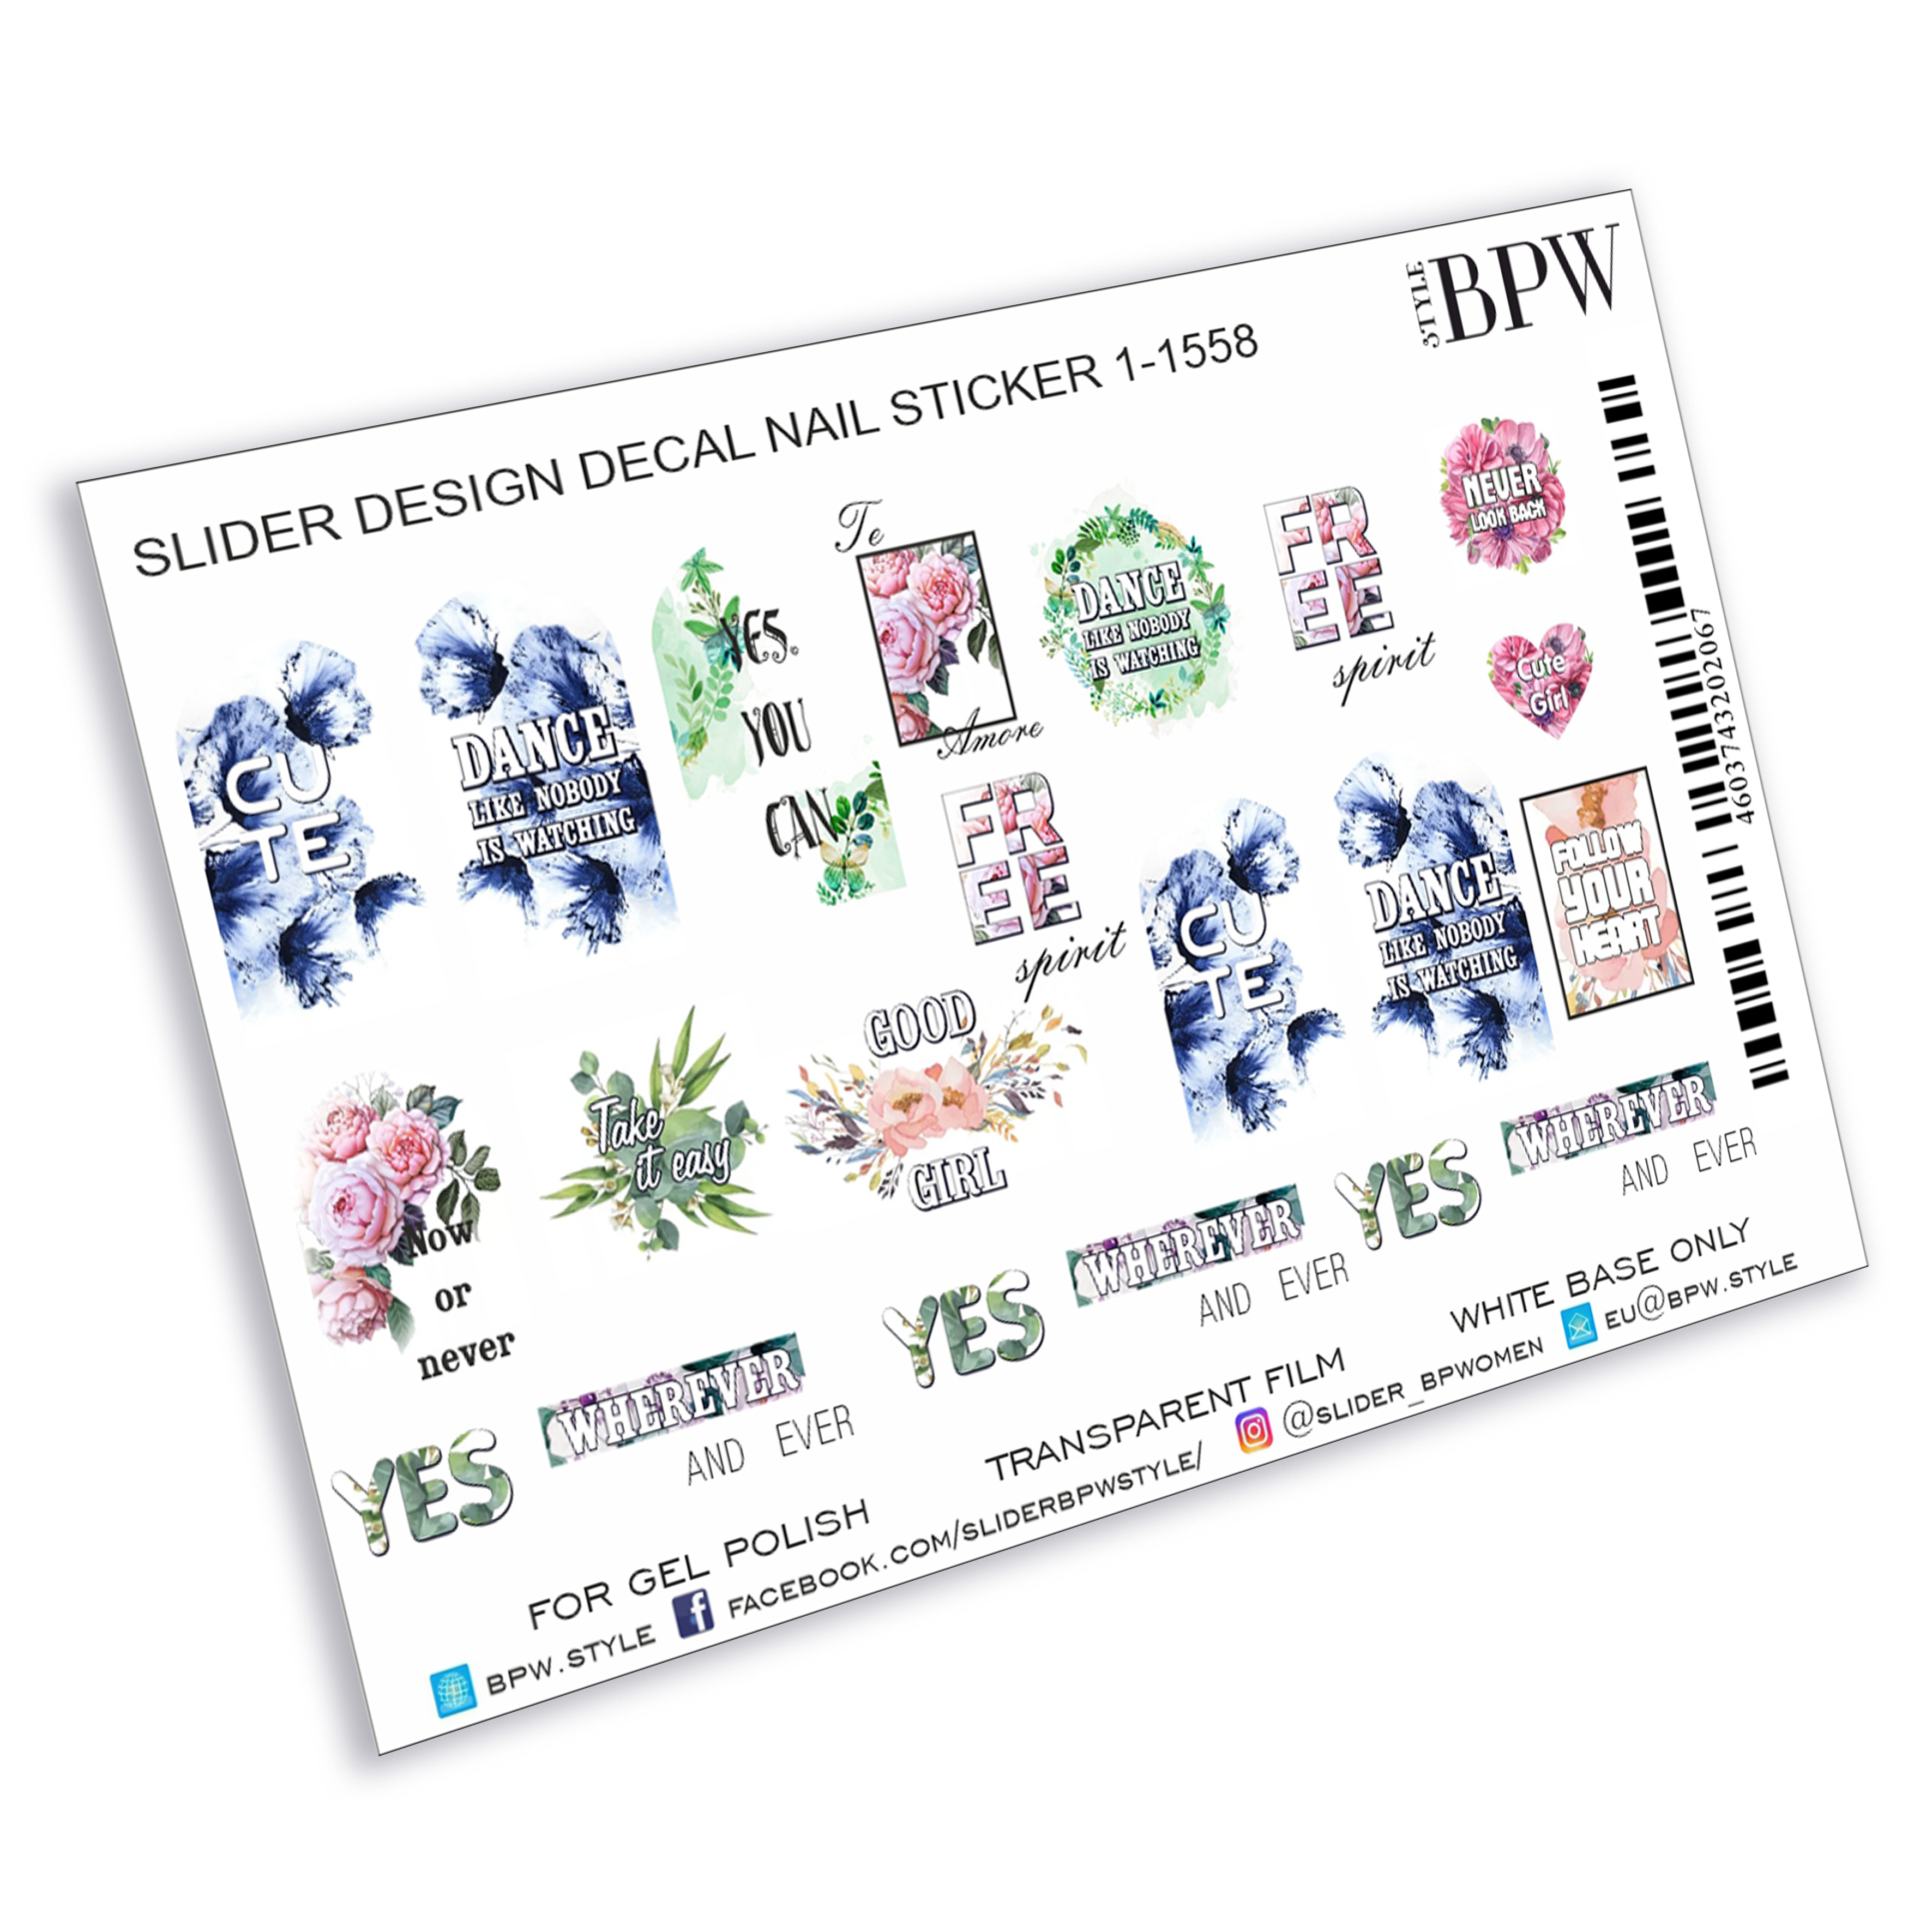 Decal nail sticker Flowers & Texts